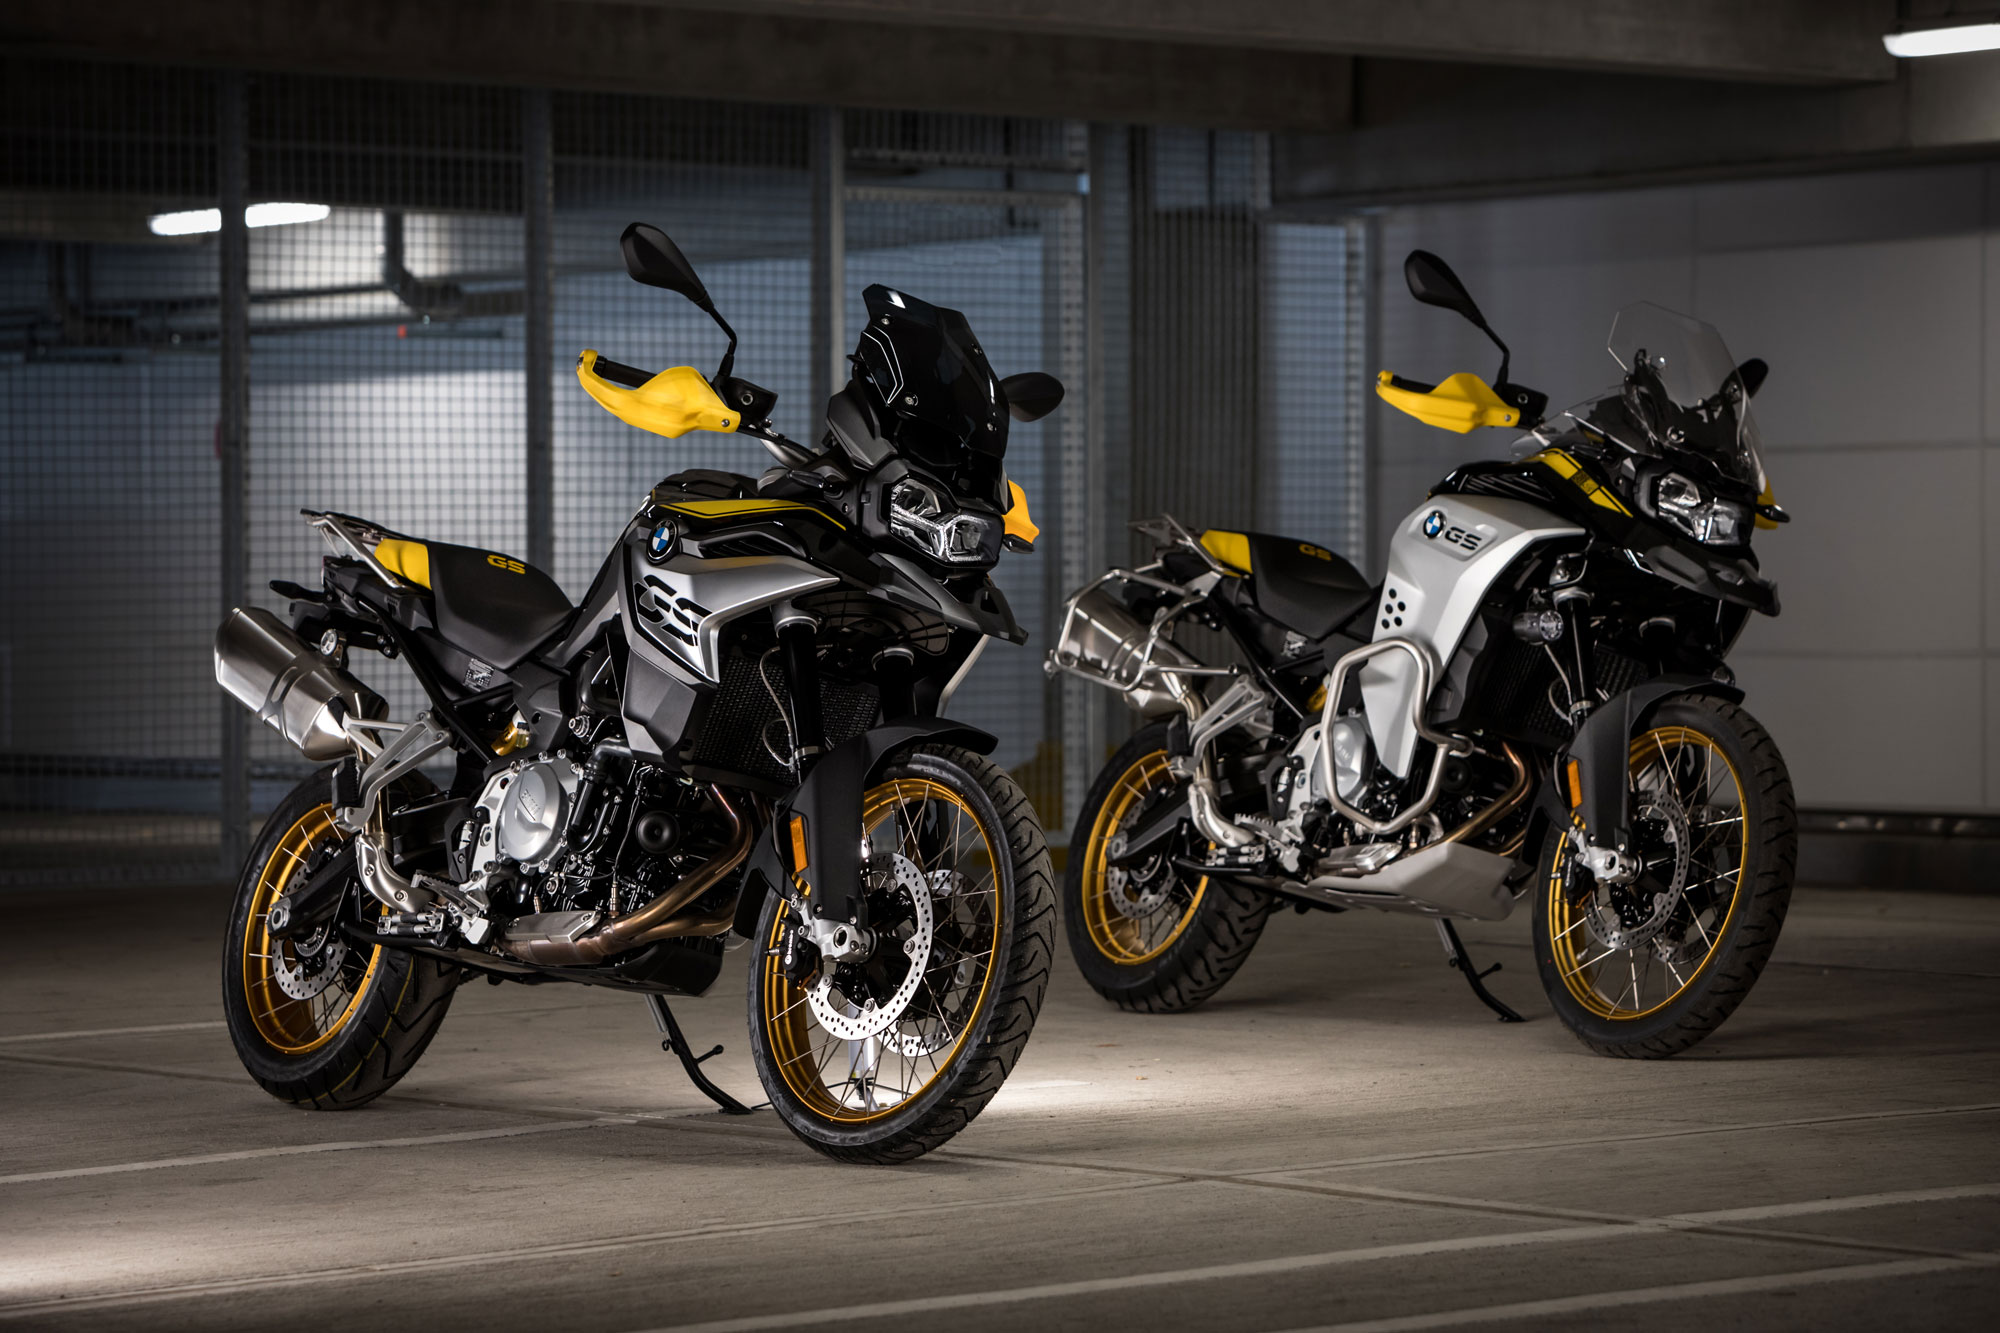 2020 BMW 40th Anniversary motorcycles in black and yellow